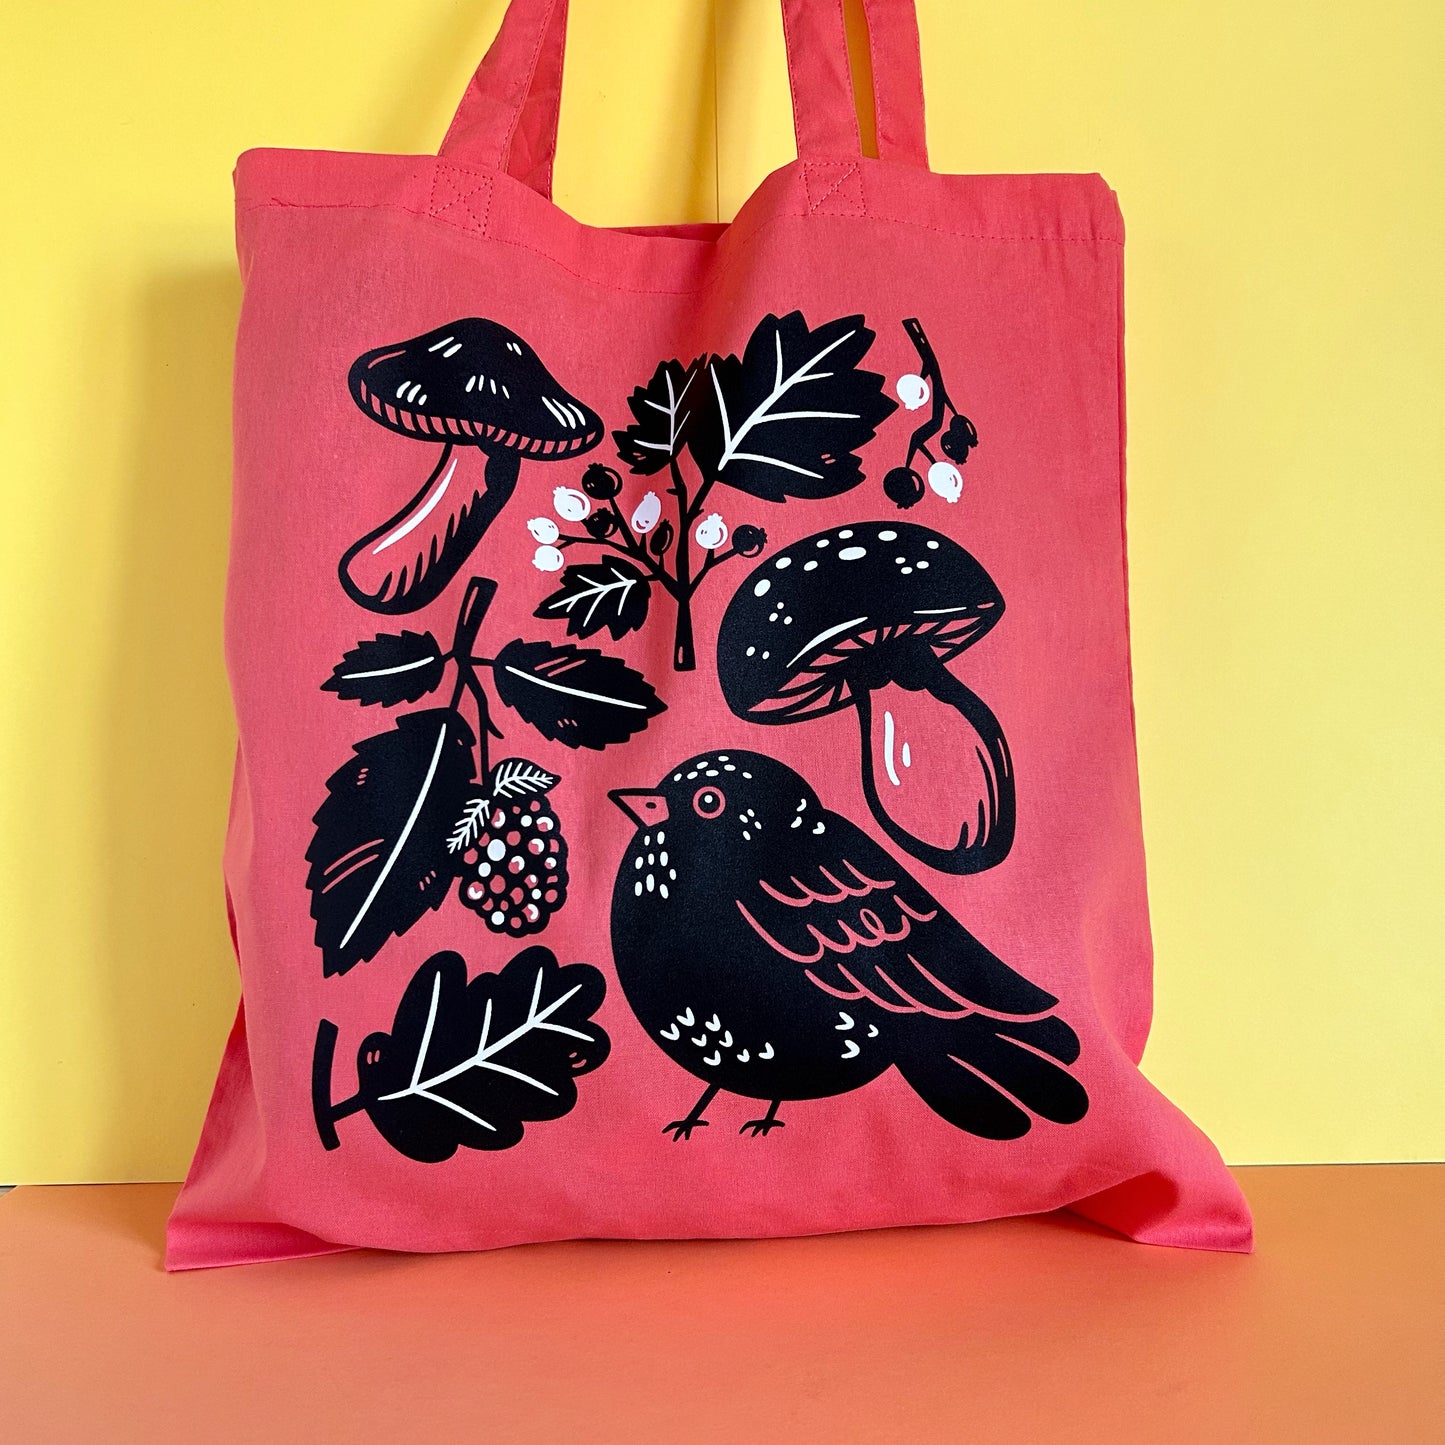 Blackbird Tote Bag in Coral Red